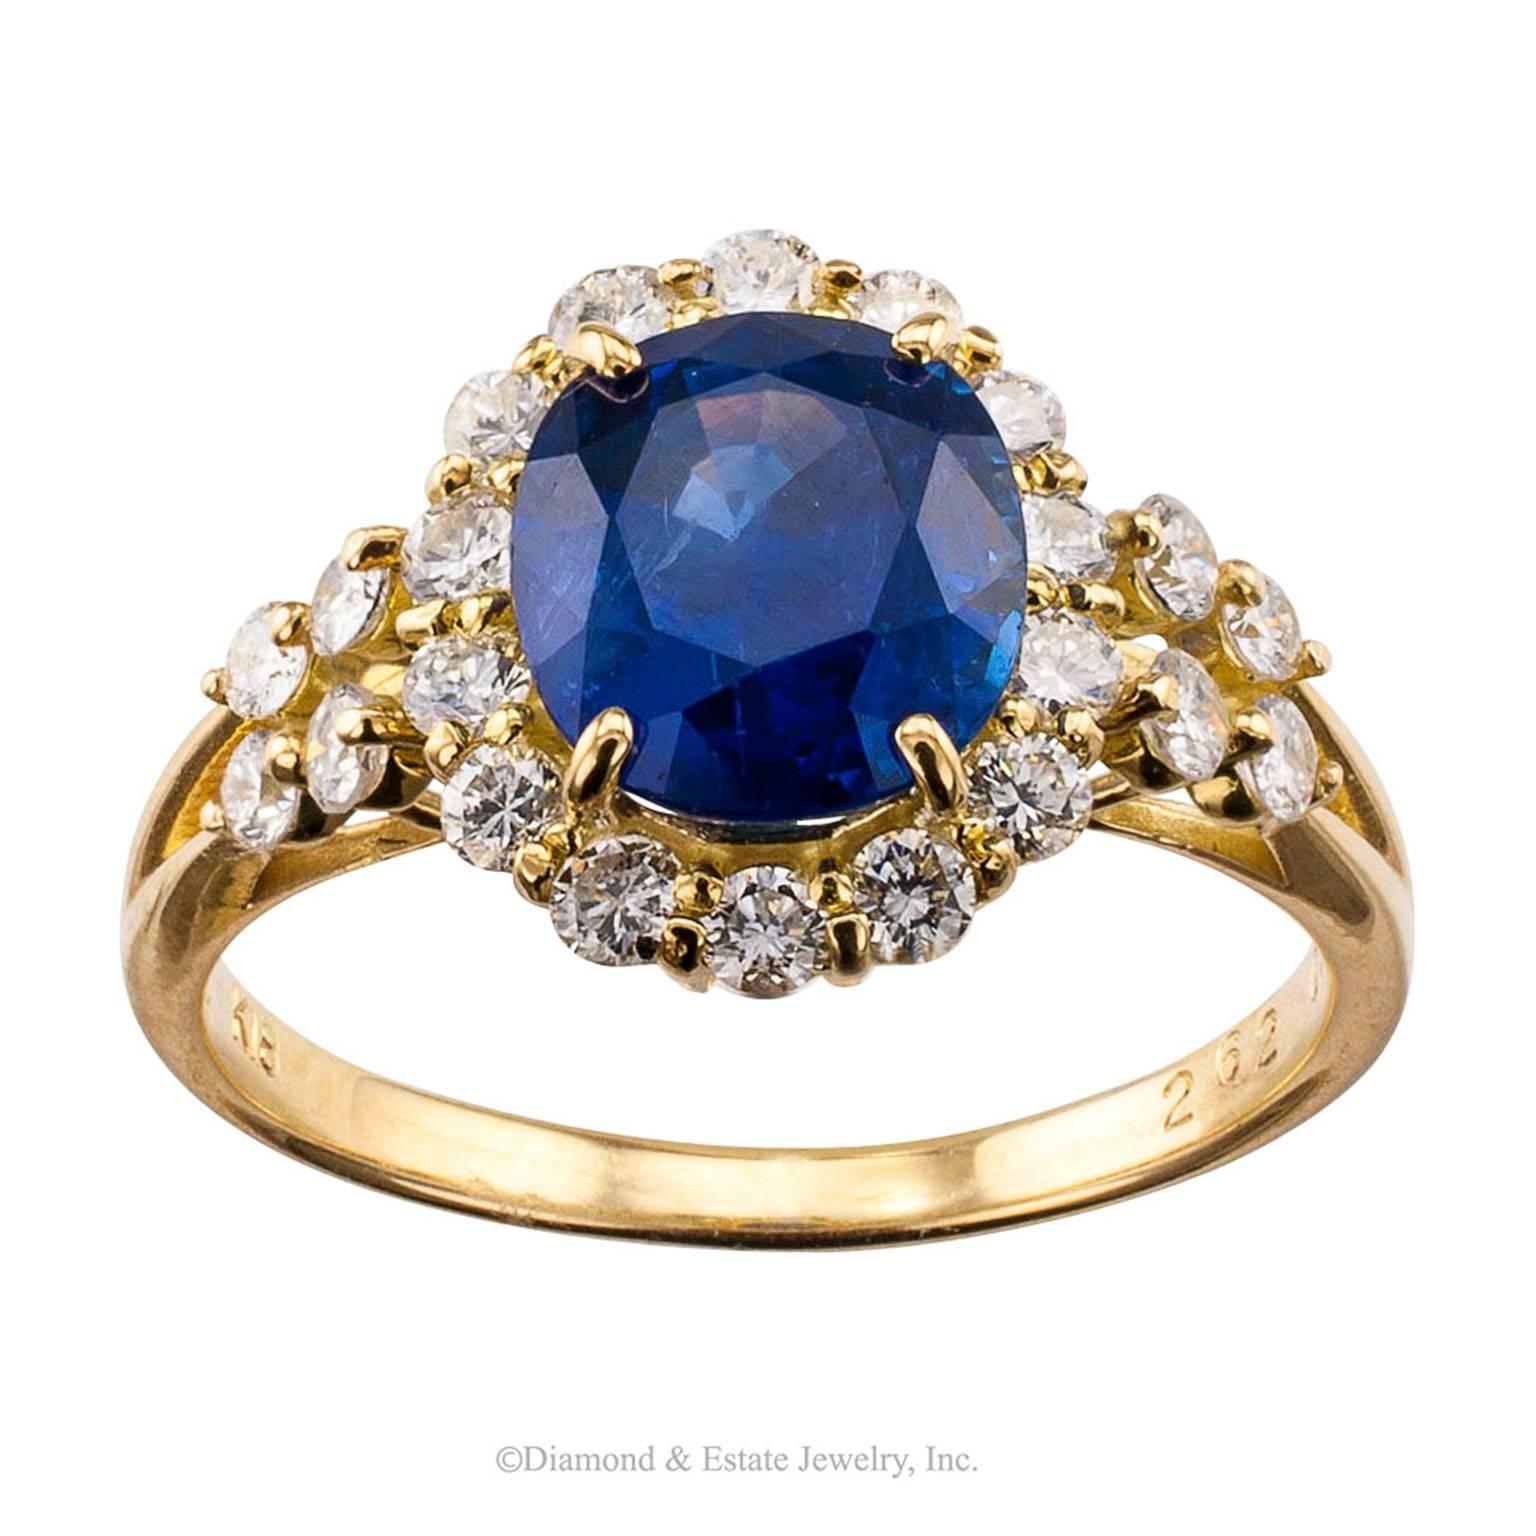 Sapphire Diamond Gold Halo Ring

2.62 carats oval sapphire halo cluster ring bordered by diamonds totaling 0.58 carat mounted in 18-karat yellow gold circa 1990. The weights of the stones are engraved inside the shank of this lovely sapphire and